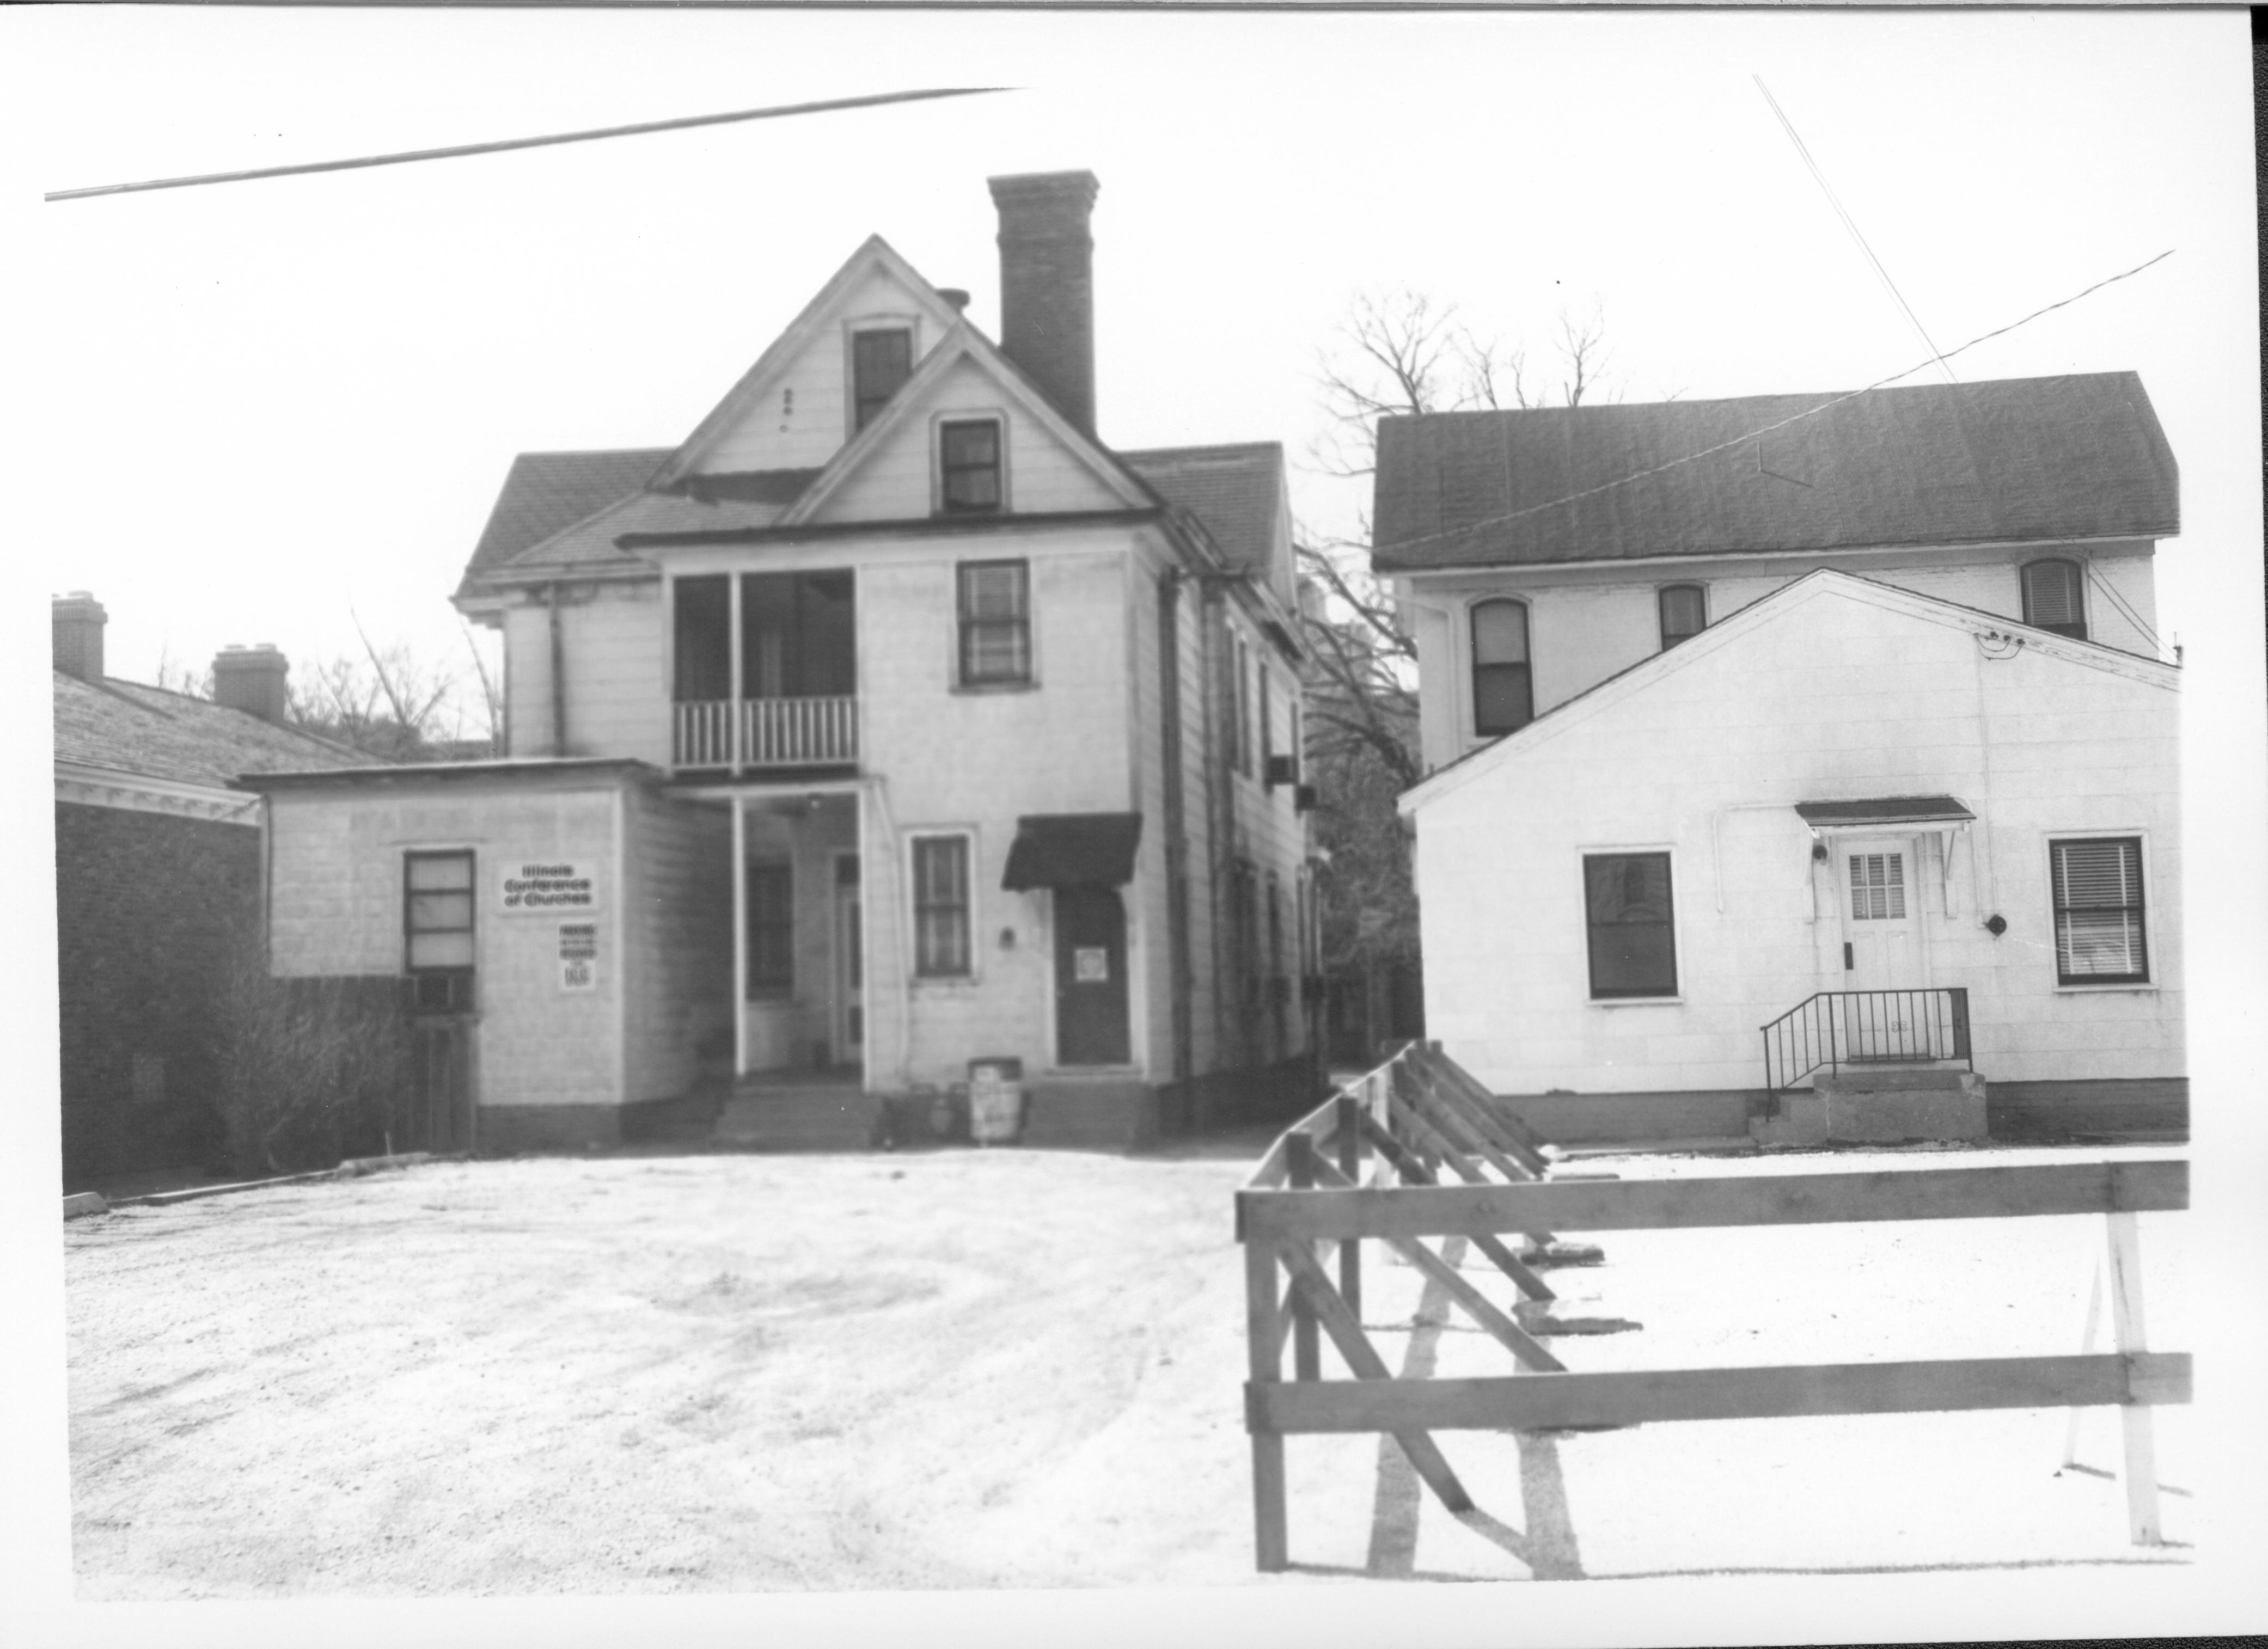 Backyards of the Homes of Dr. Albert T. Kwedar (right) and Eugene McNally et ux (left) on Block 7, Lots 4 & 5.  Area is now Visitor Center along 7th Street. Looking West along 7th Street south of Capitol Visitor Center, parking lot, Kwedar, McNally